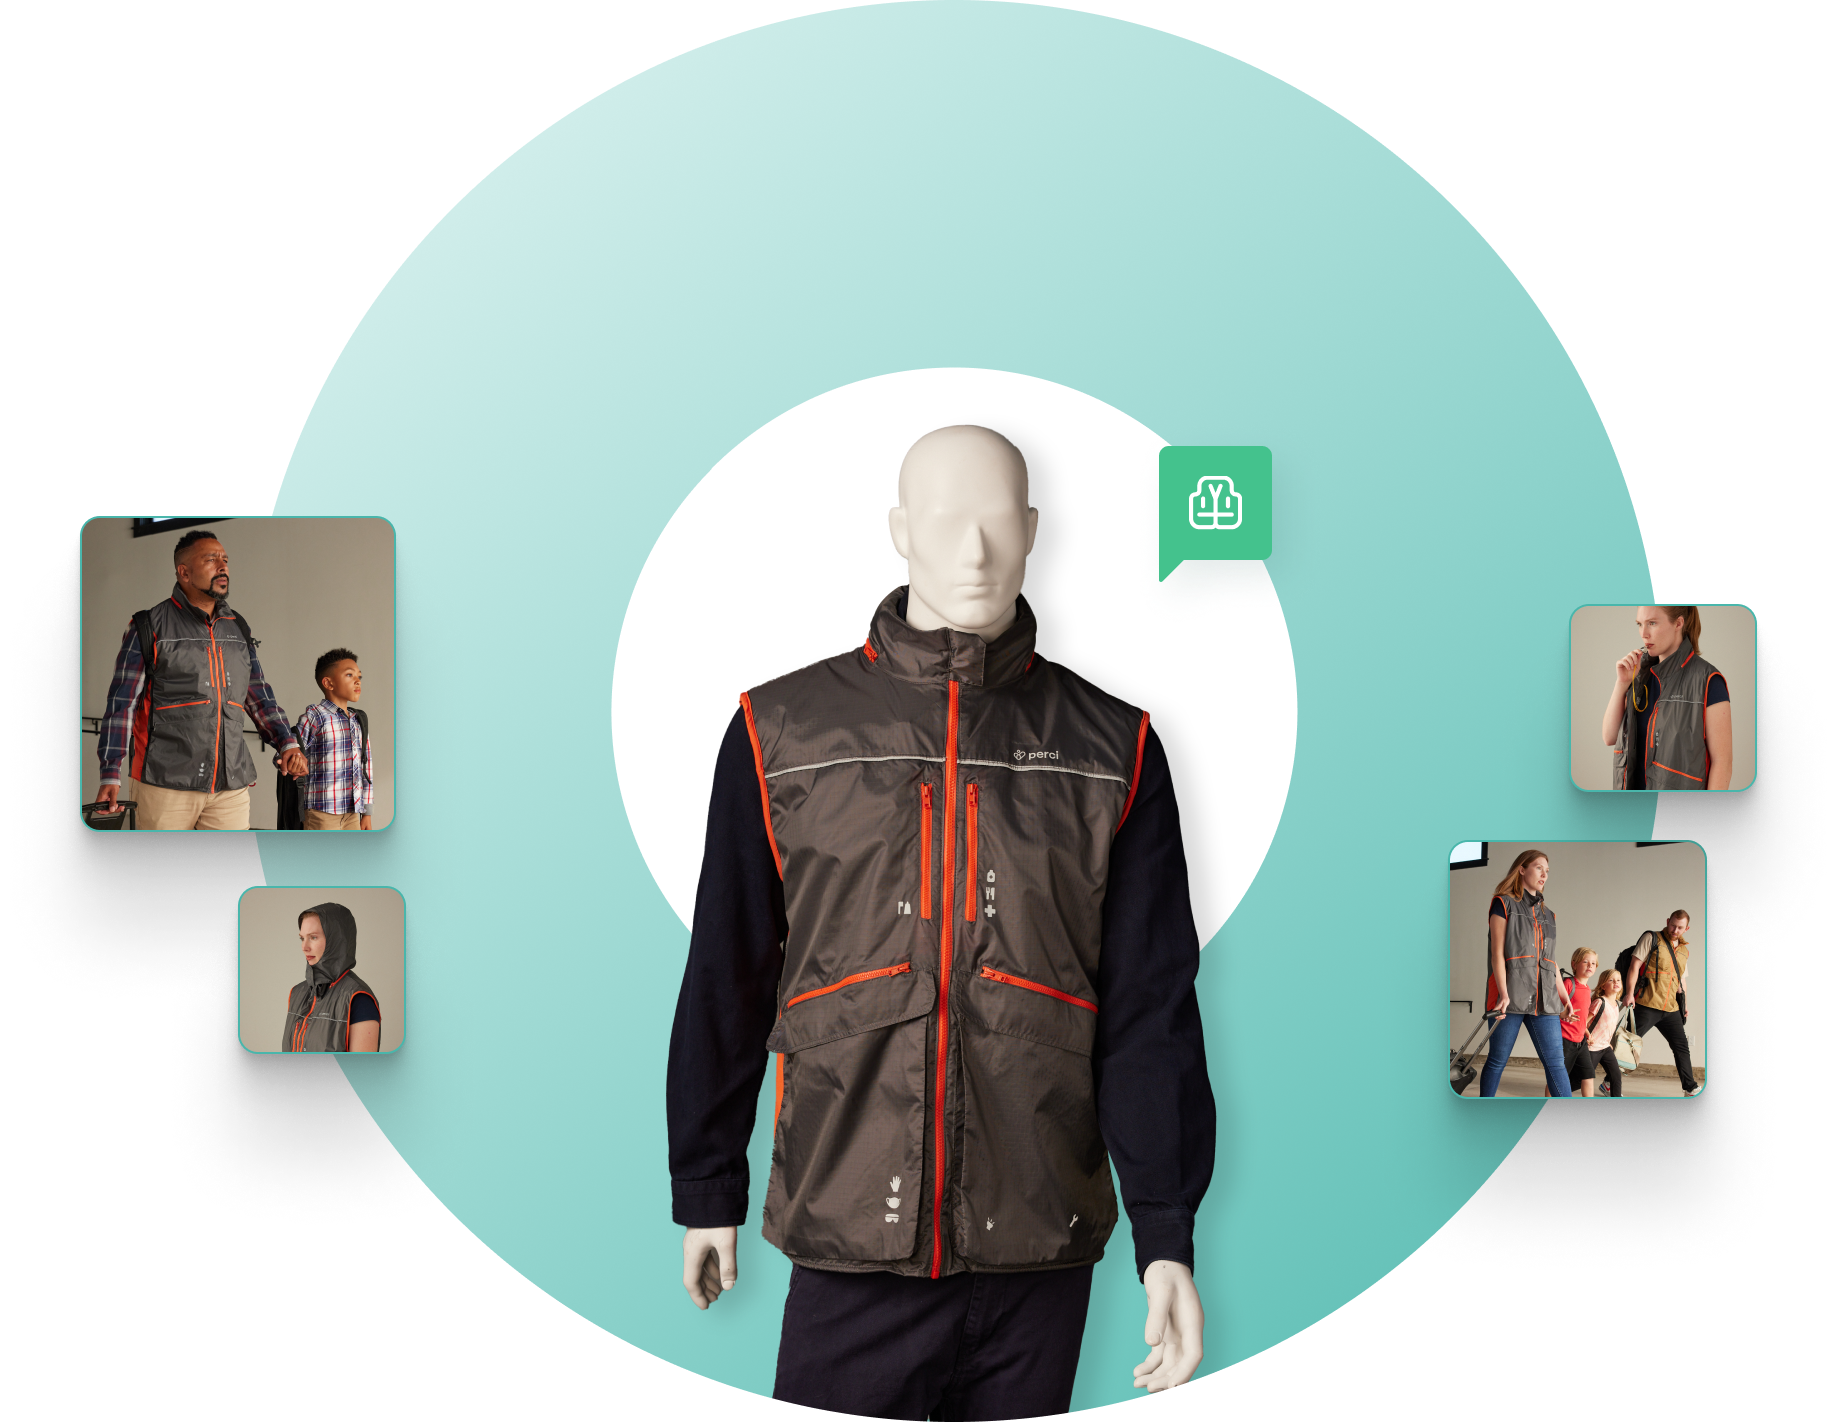 Perci Vest on a rotating mannequin in the center surrounded by four images of real people evacuating while wearing Perci vest